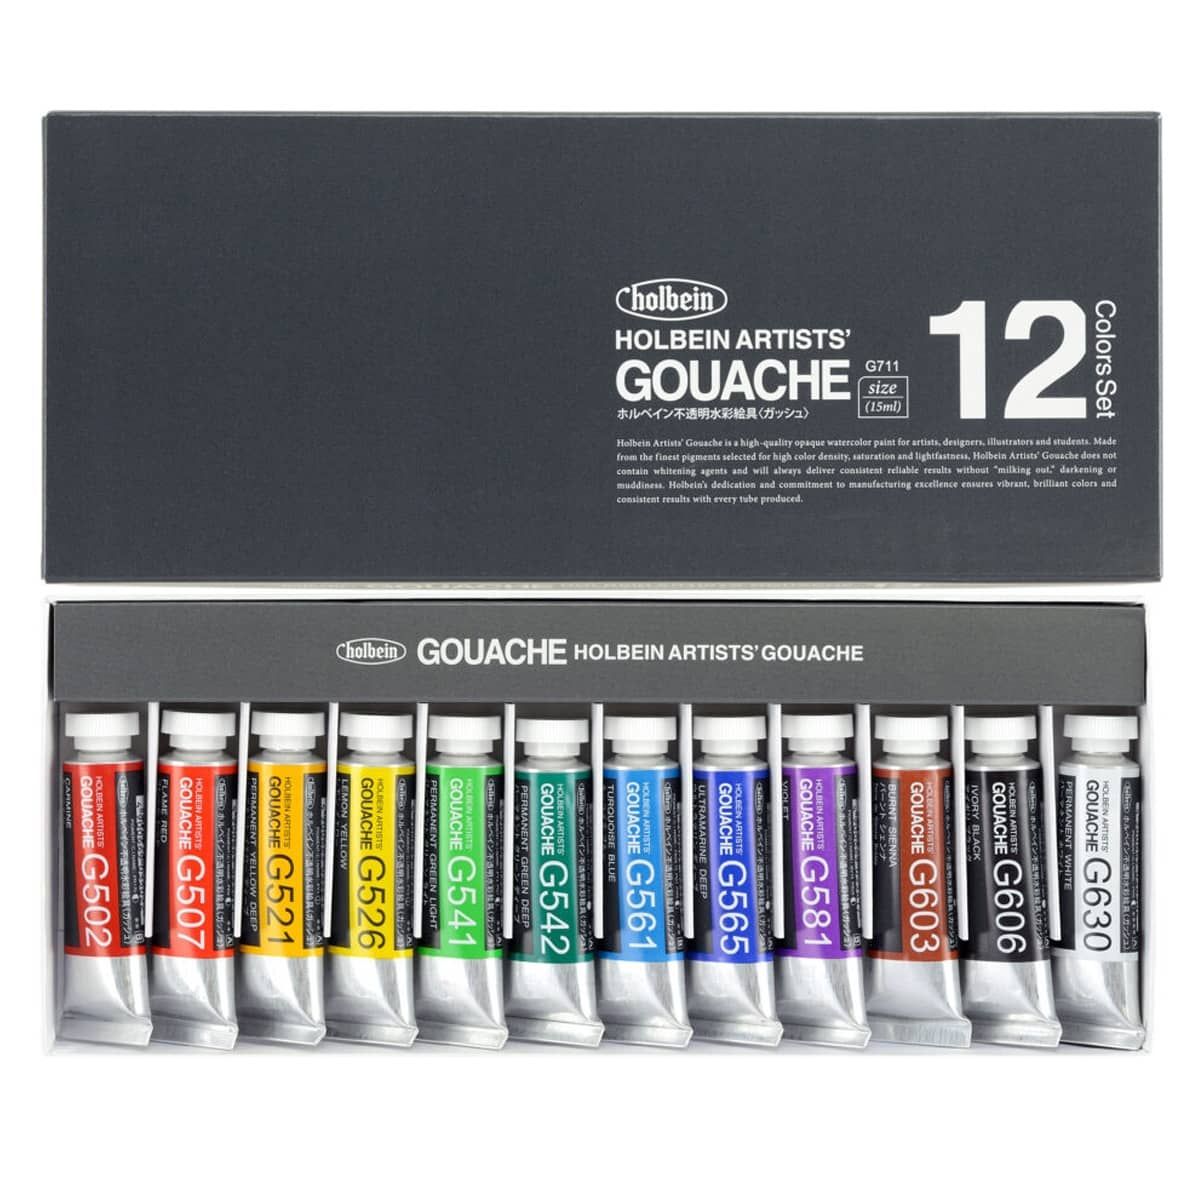 Holbein Designer Gouache 15ml Set of 12 Assorted Colors